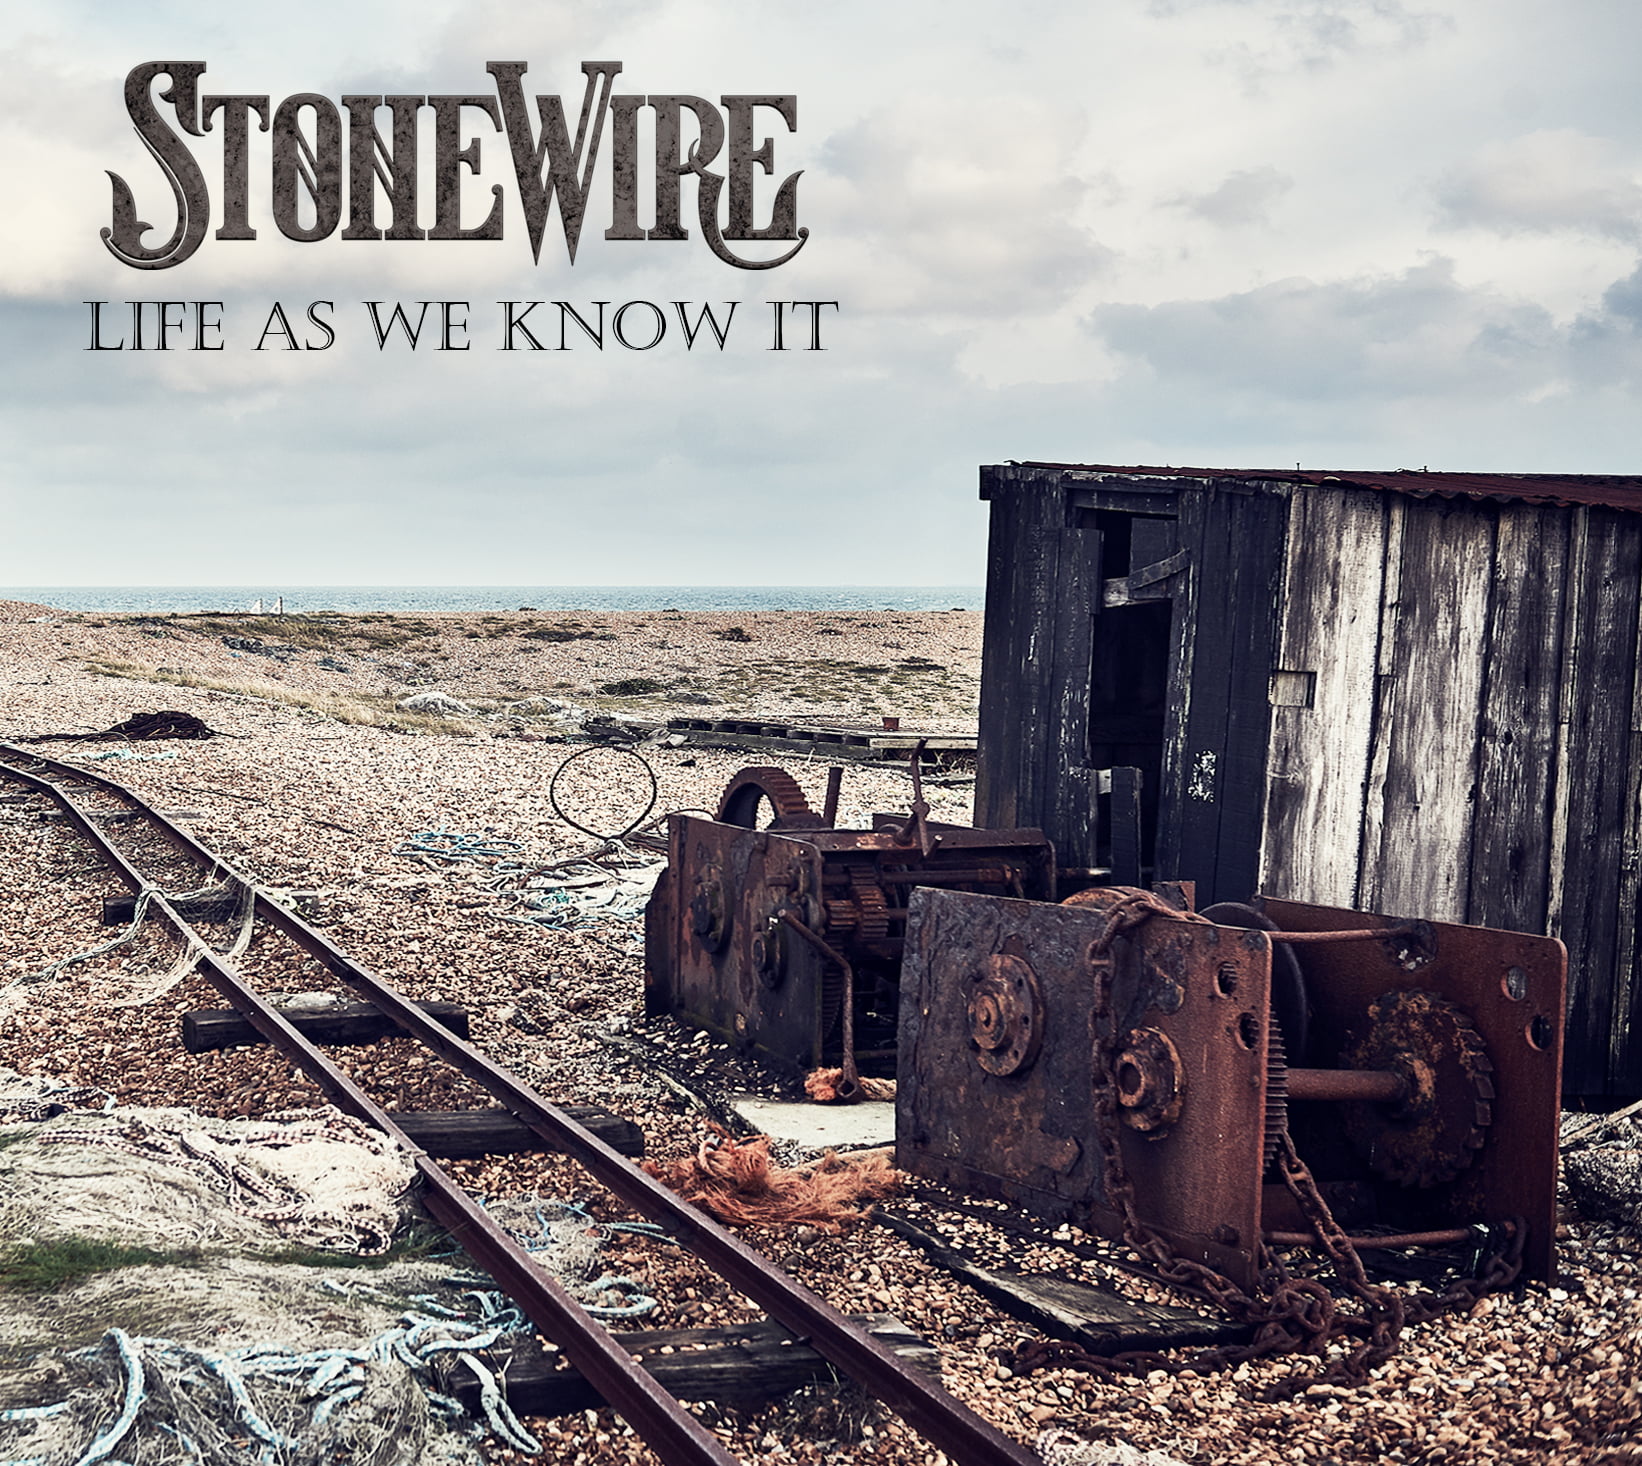 Stonewire - Life as we know it